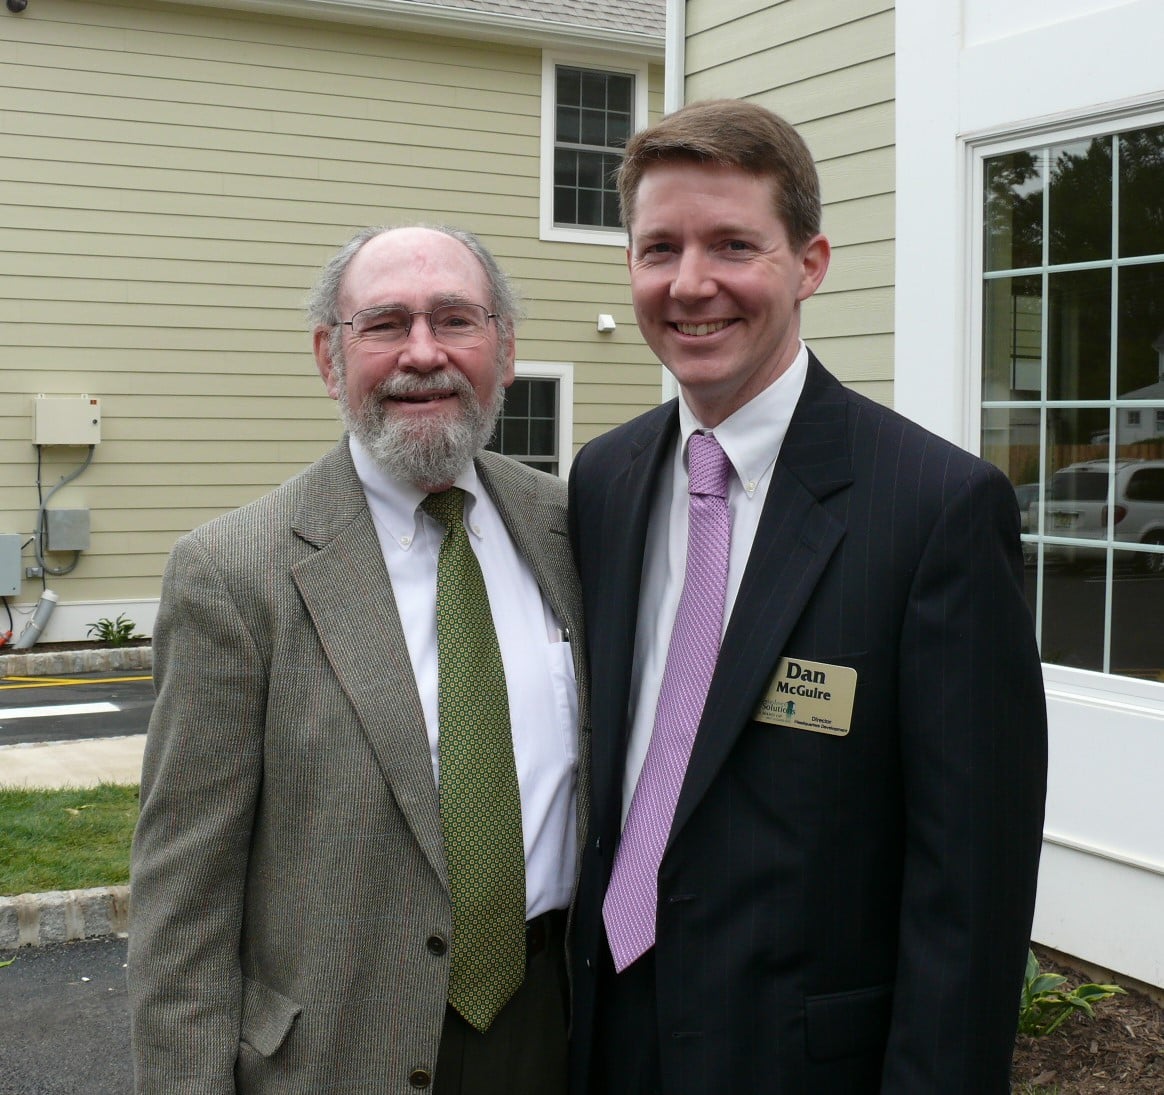 David McGuire (left) and son Dan McGuire, Homeless Solutions CEO